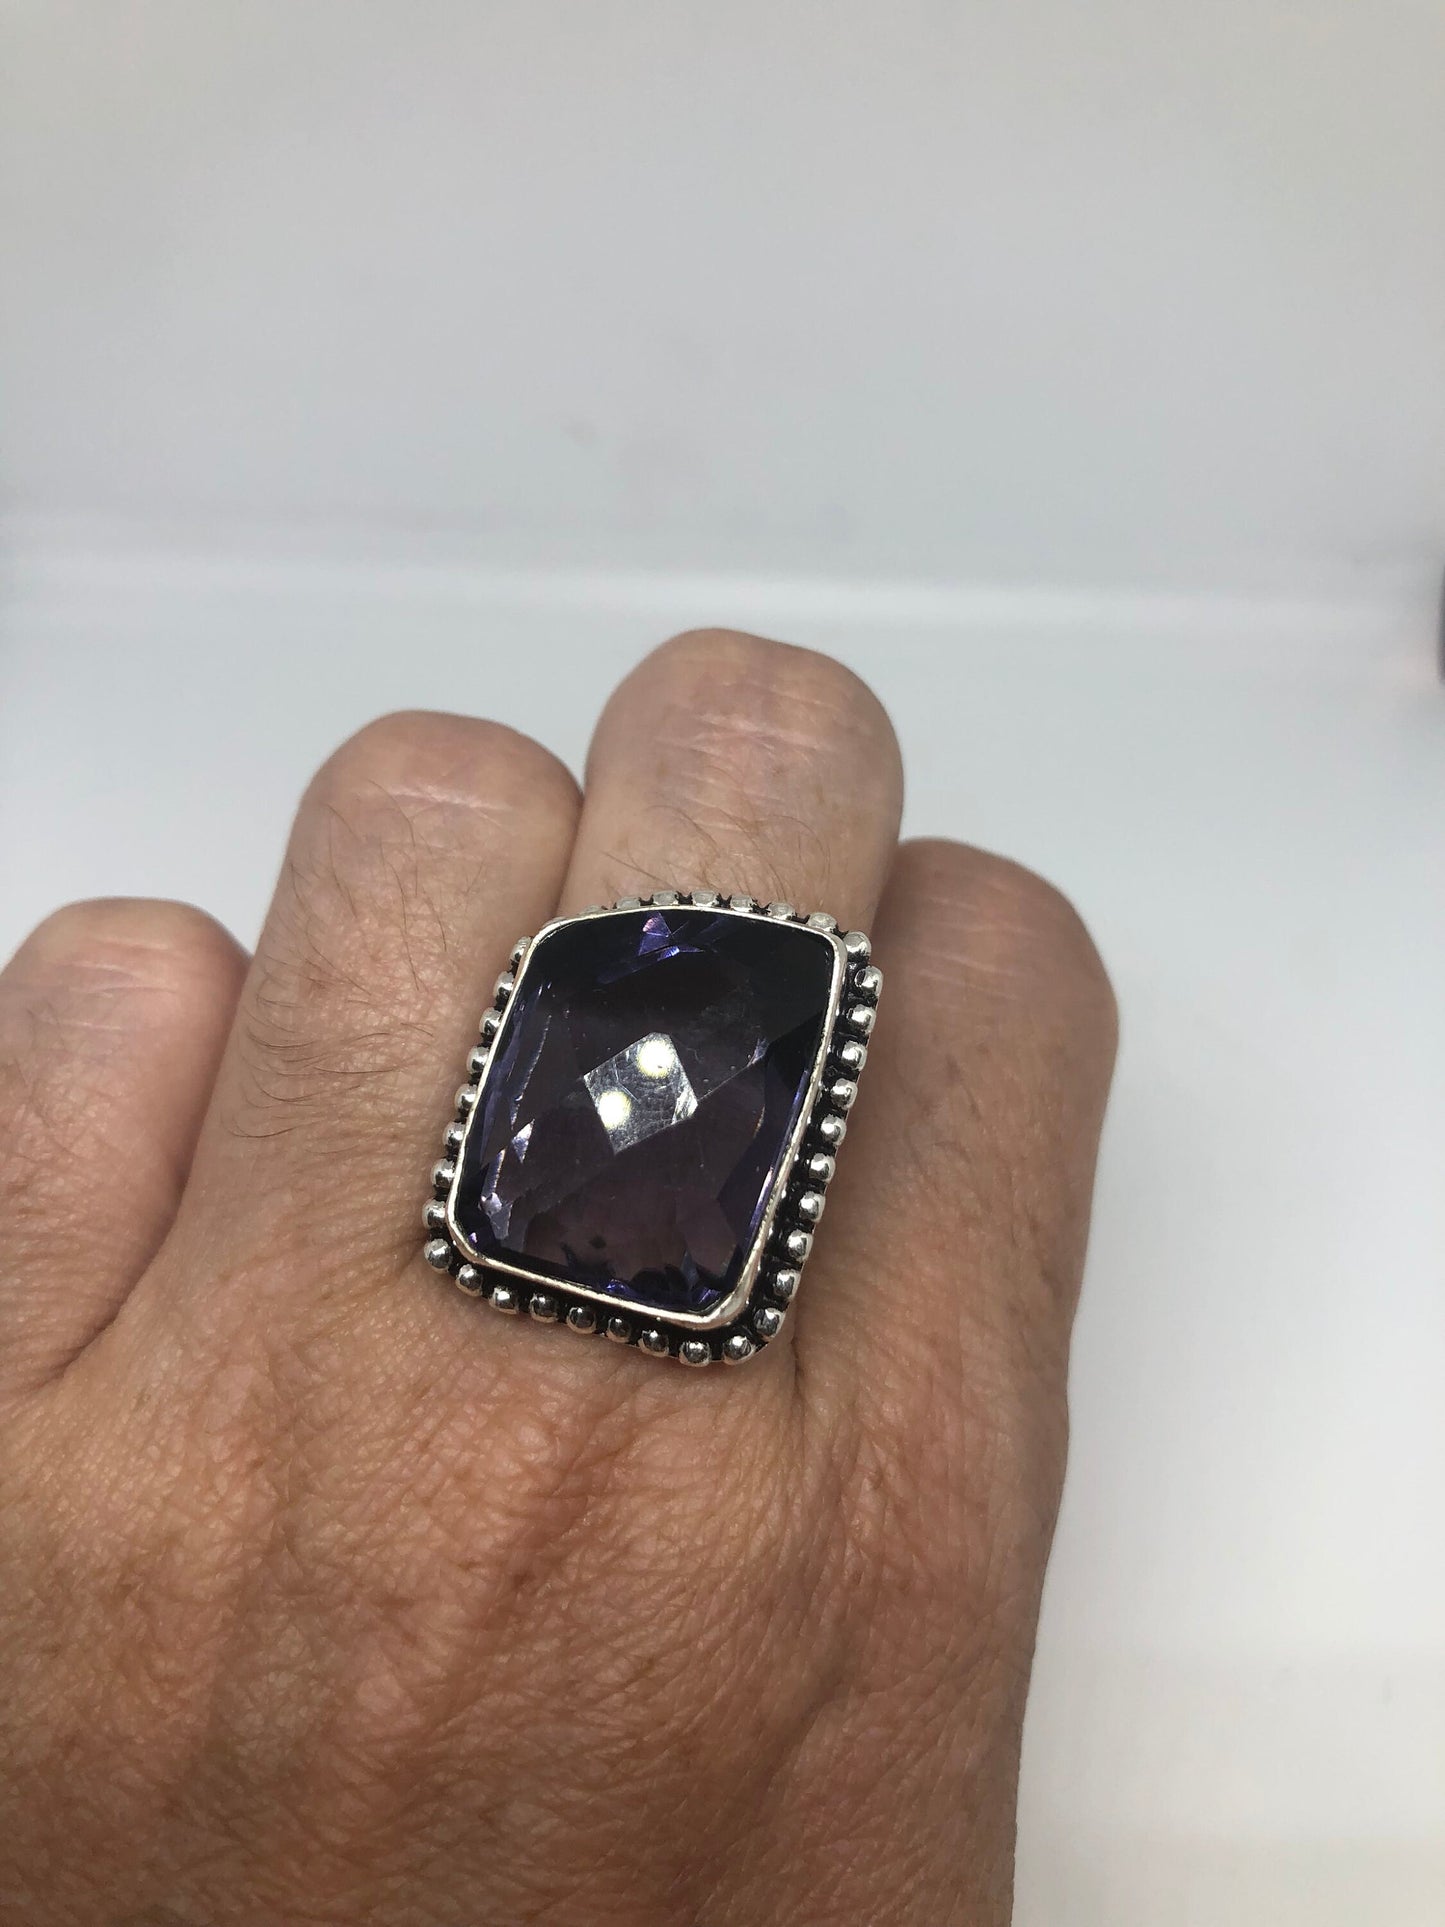 Vintage Deep Purple Vintage Art Glass Ring About an Inch Long Knuckle Ring